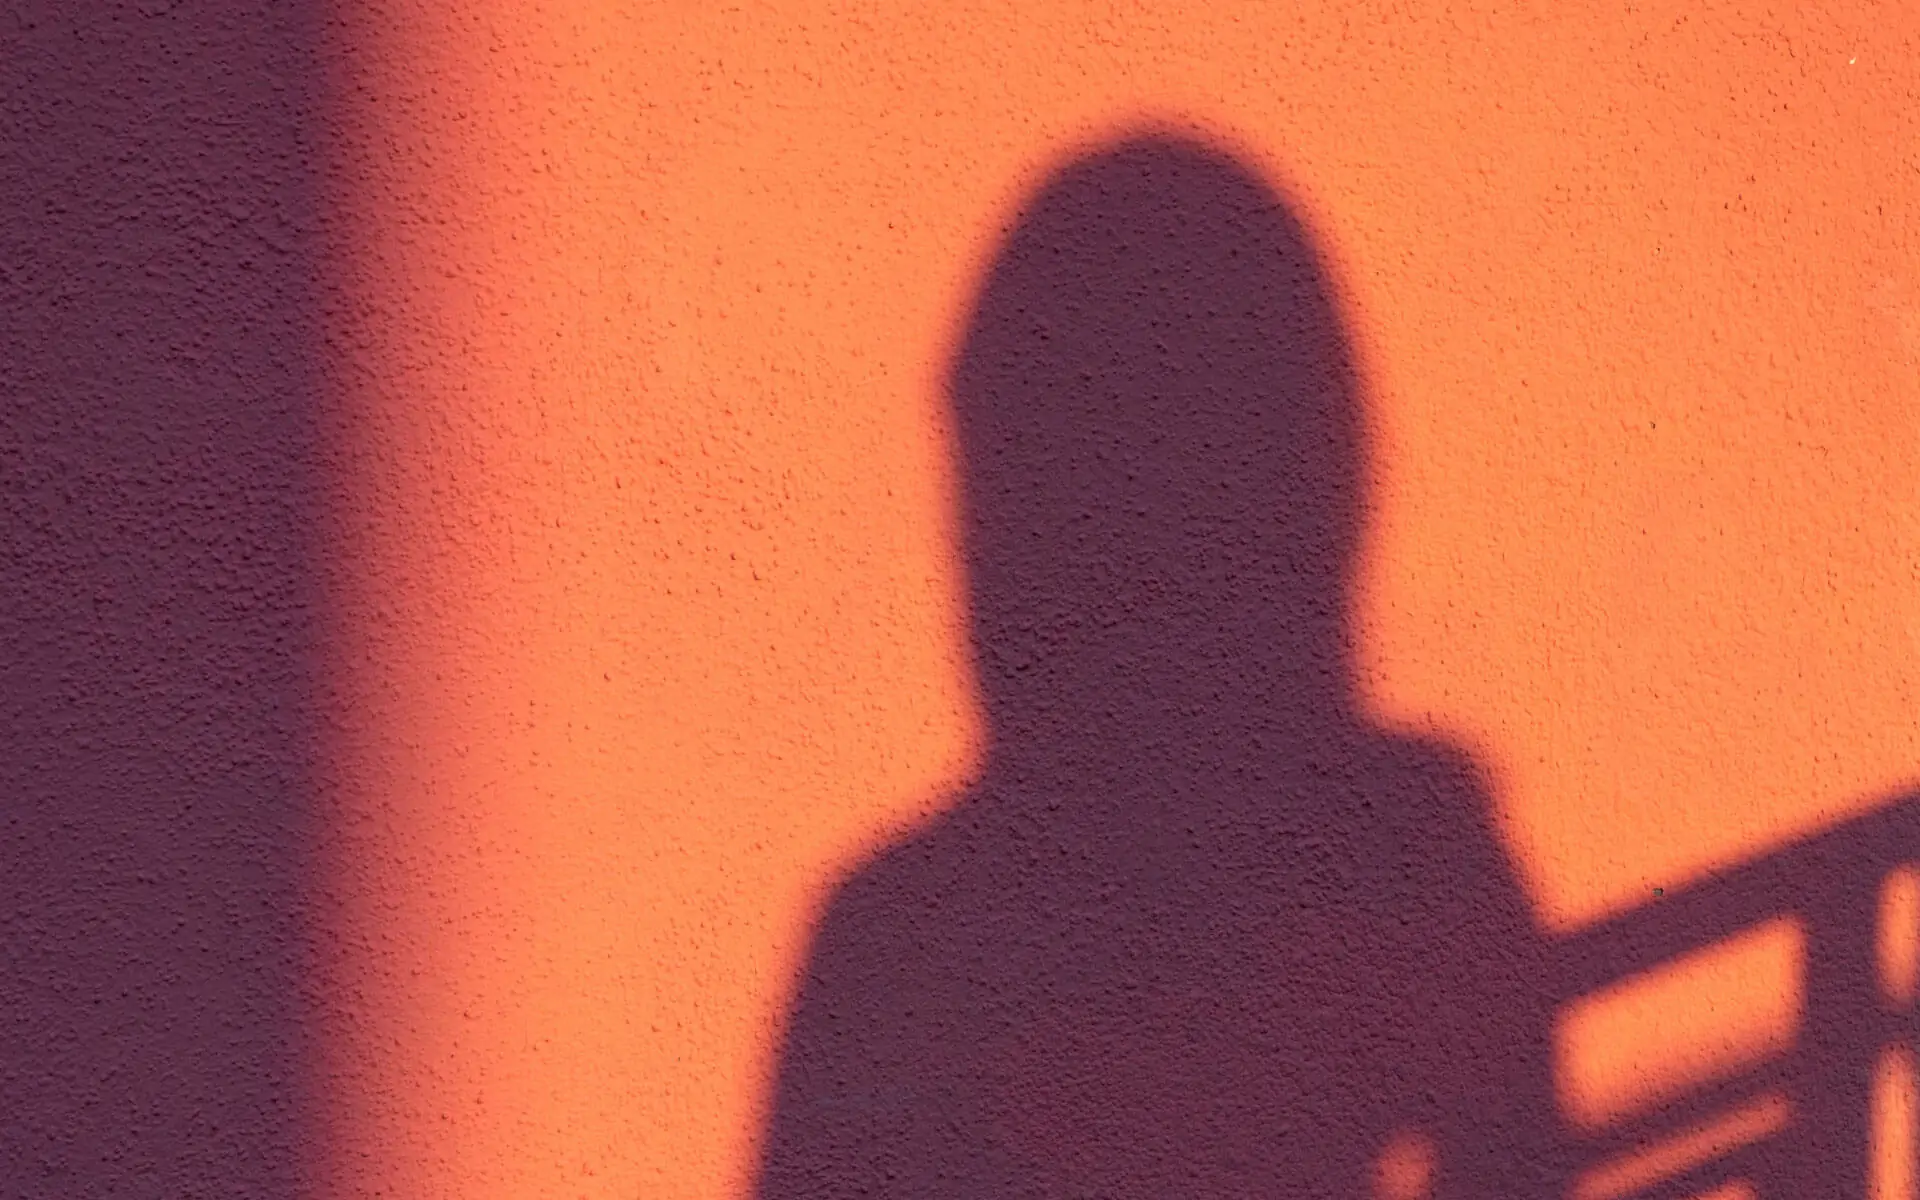 Shadow of a woman projected on an orange wall used to symbolize the parts of ourselves we can't see.